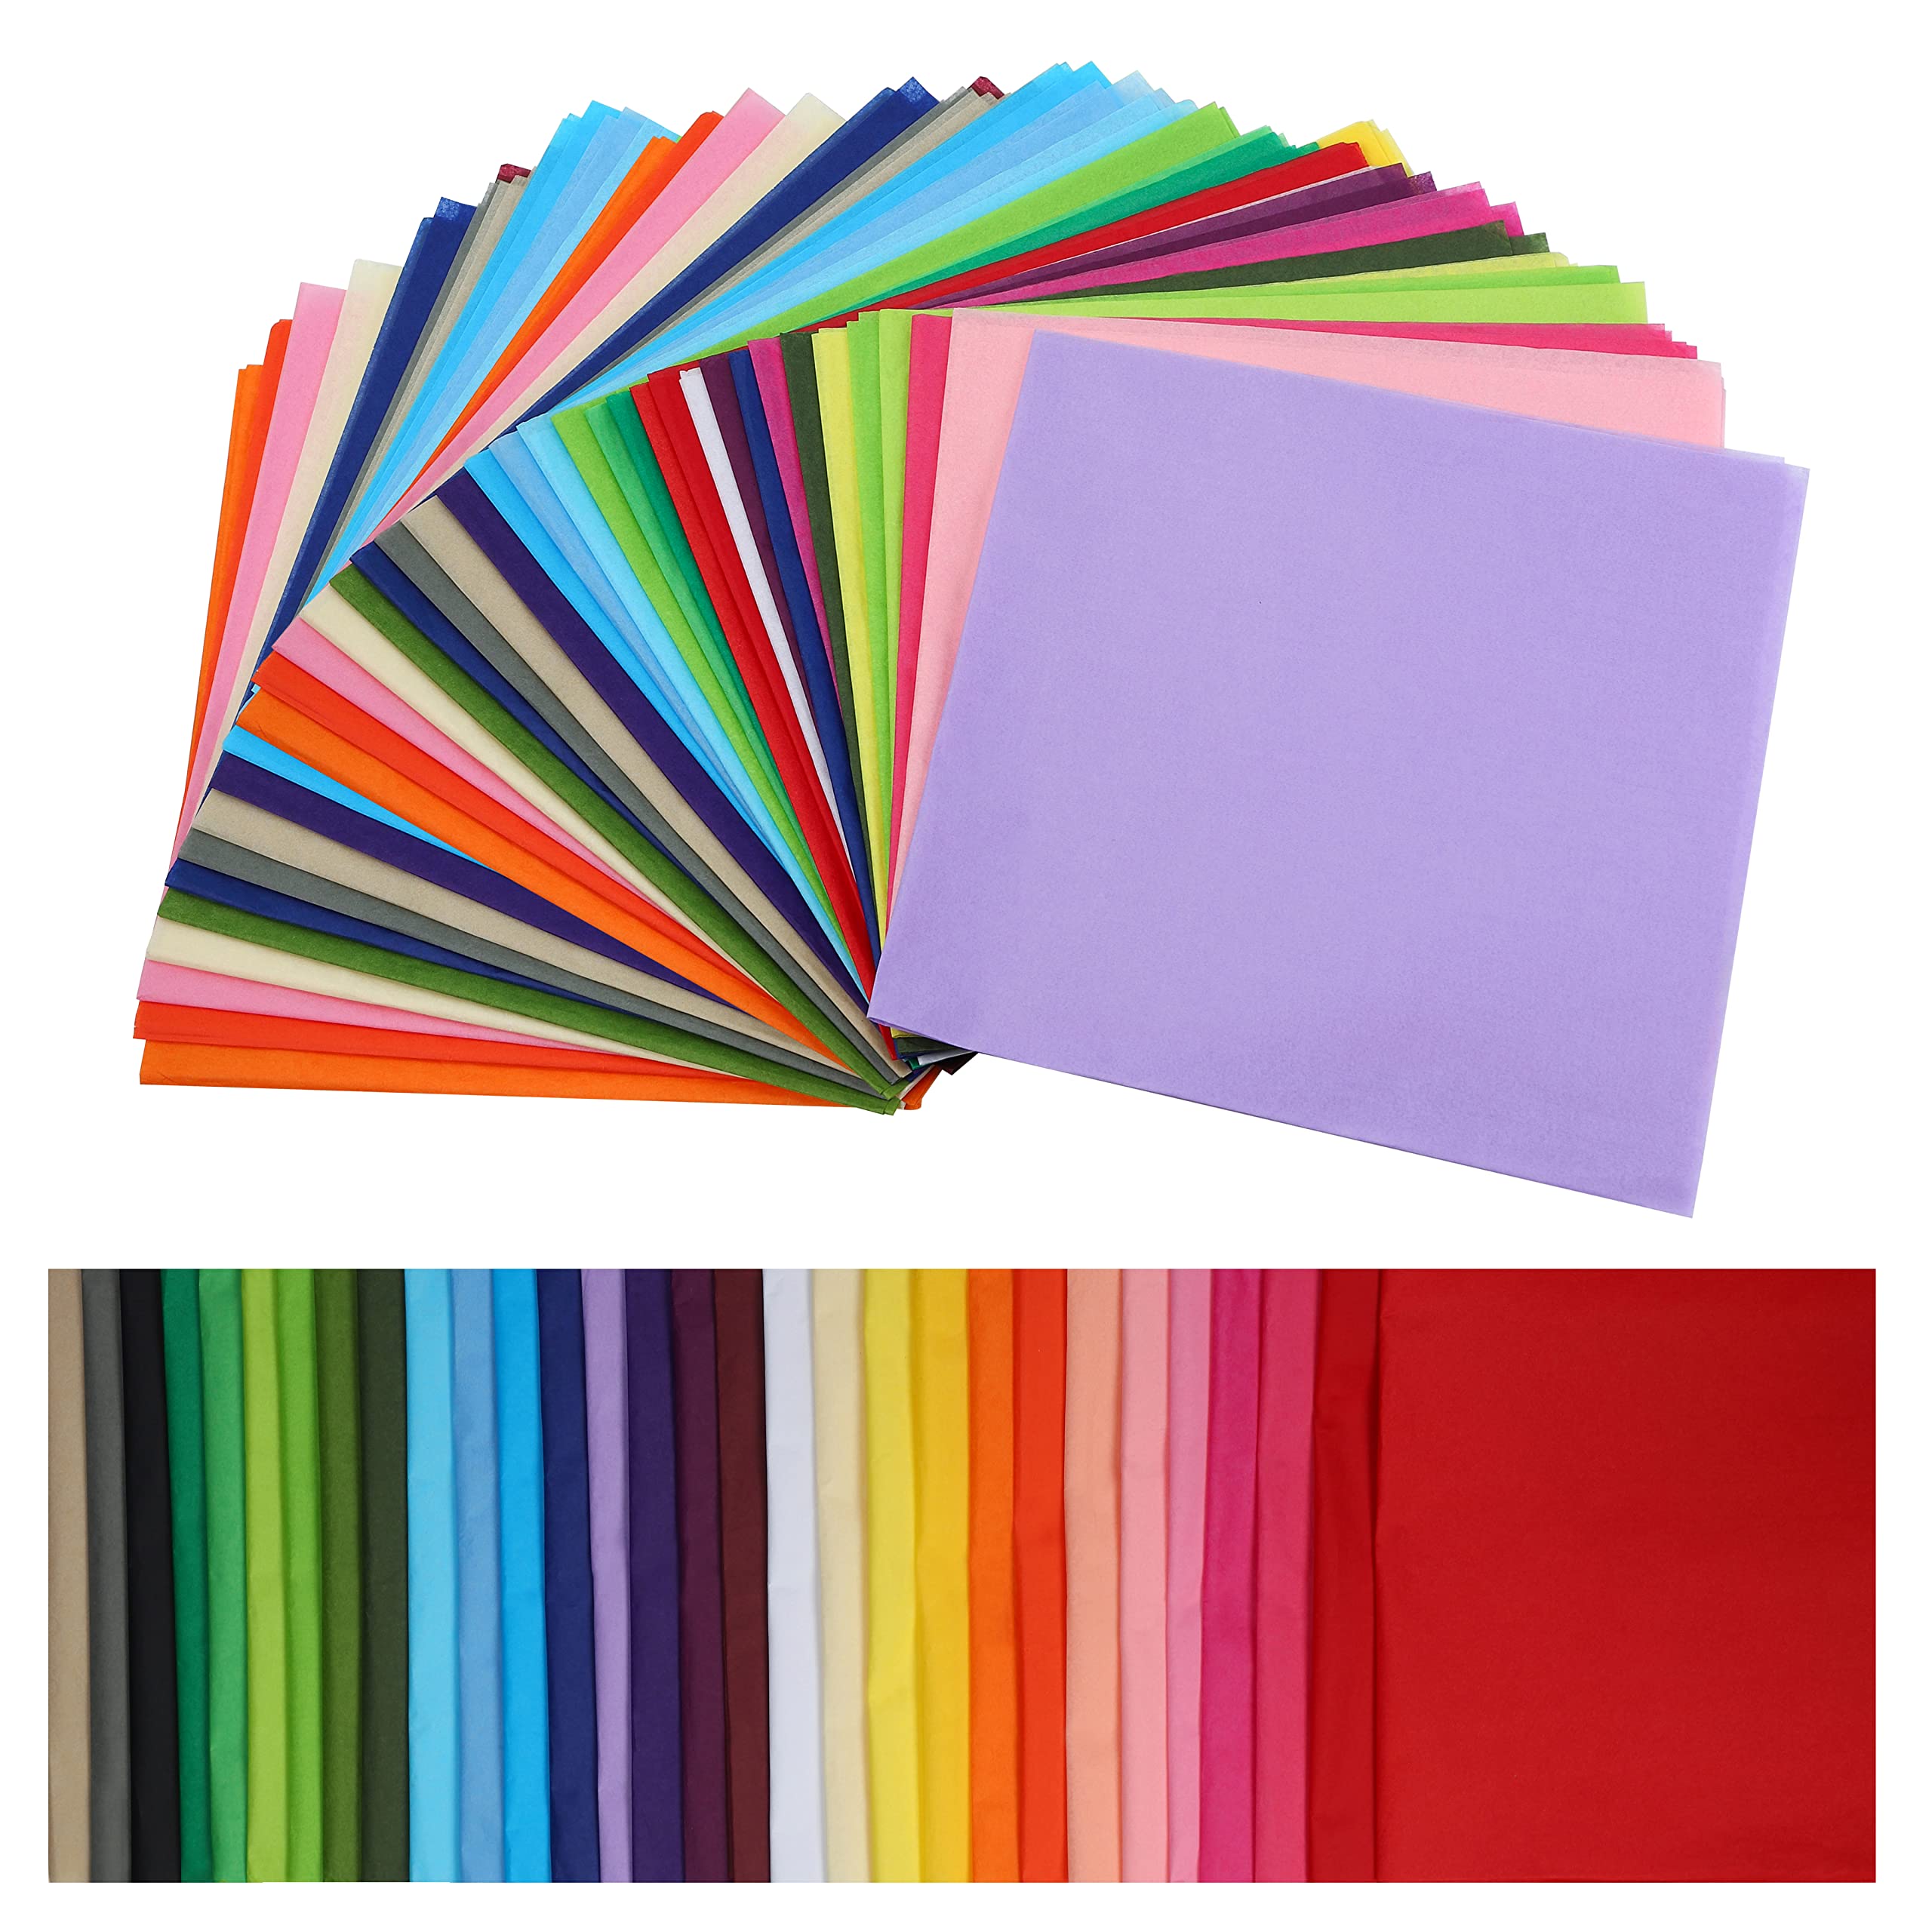 Packanewly 150 Sheets (20 x 20) Bulk Tissue Paper 30 Assorted